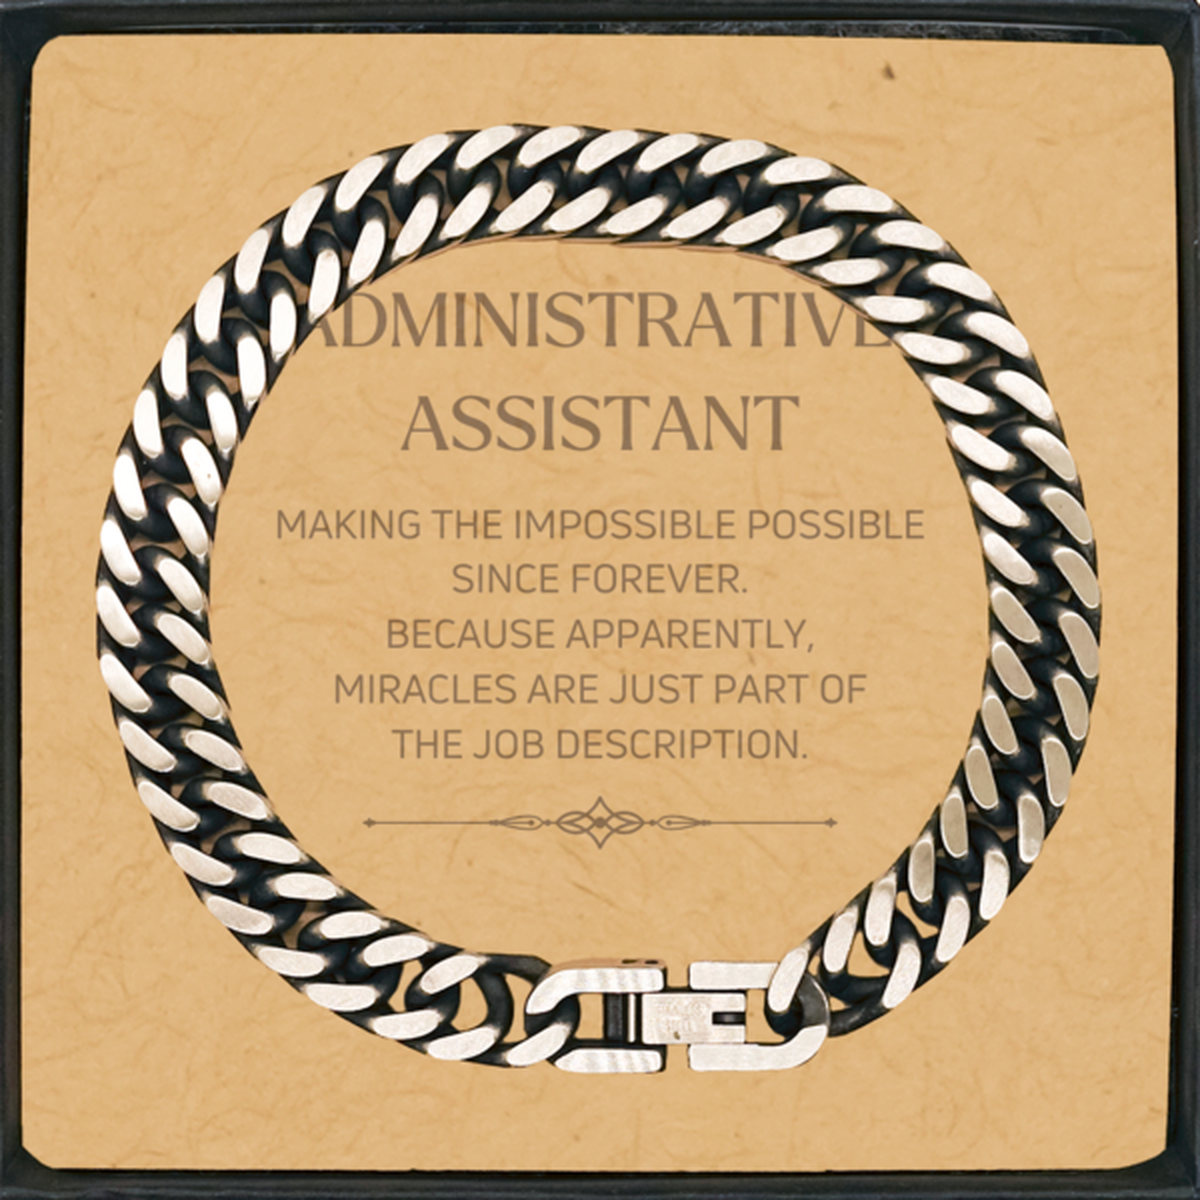 Funny Administrative Assistant Gifts, Miracles are just part of the job description, Inspirational Birthday Cuban Link Chain Bracelet For Administrative Assistant, Men, Women, Coworkers, Friends, Boss